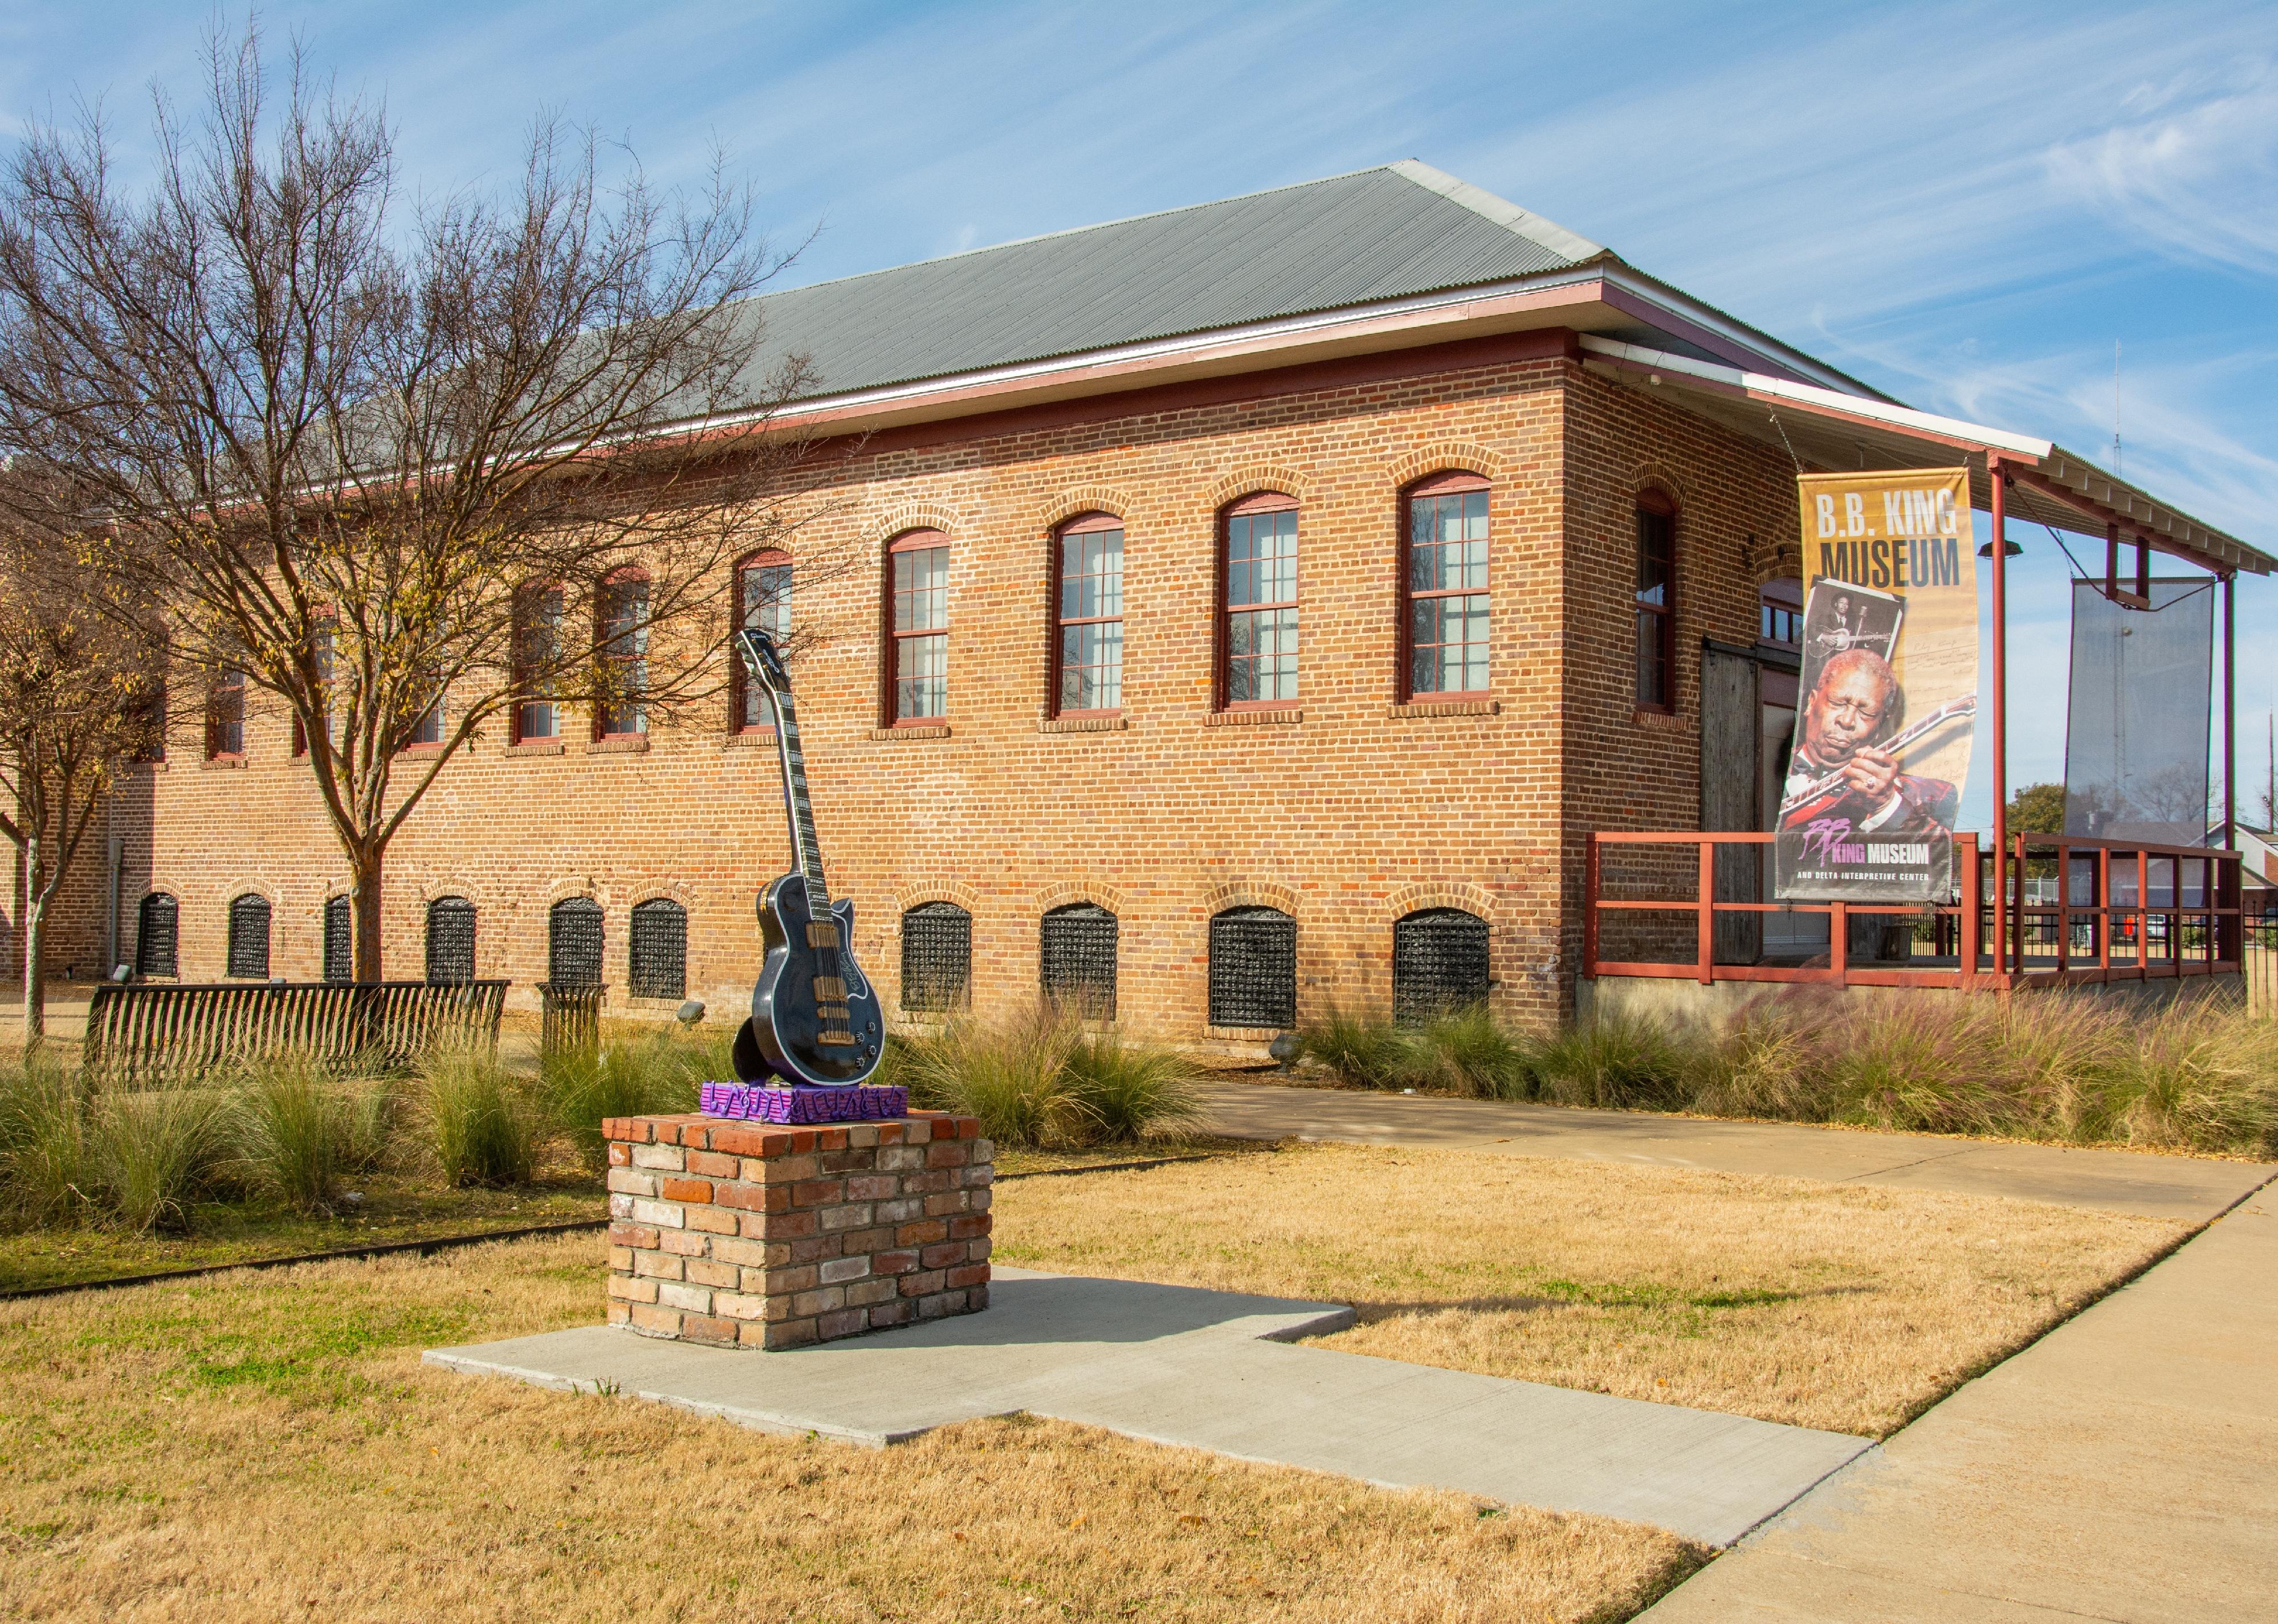 B.B. King Museum in Indianola, Mississippi.